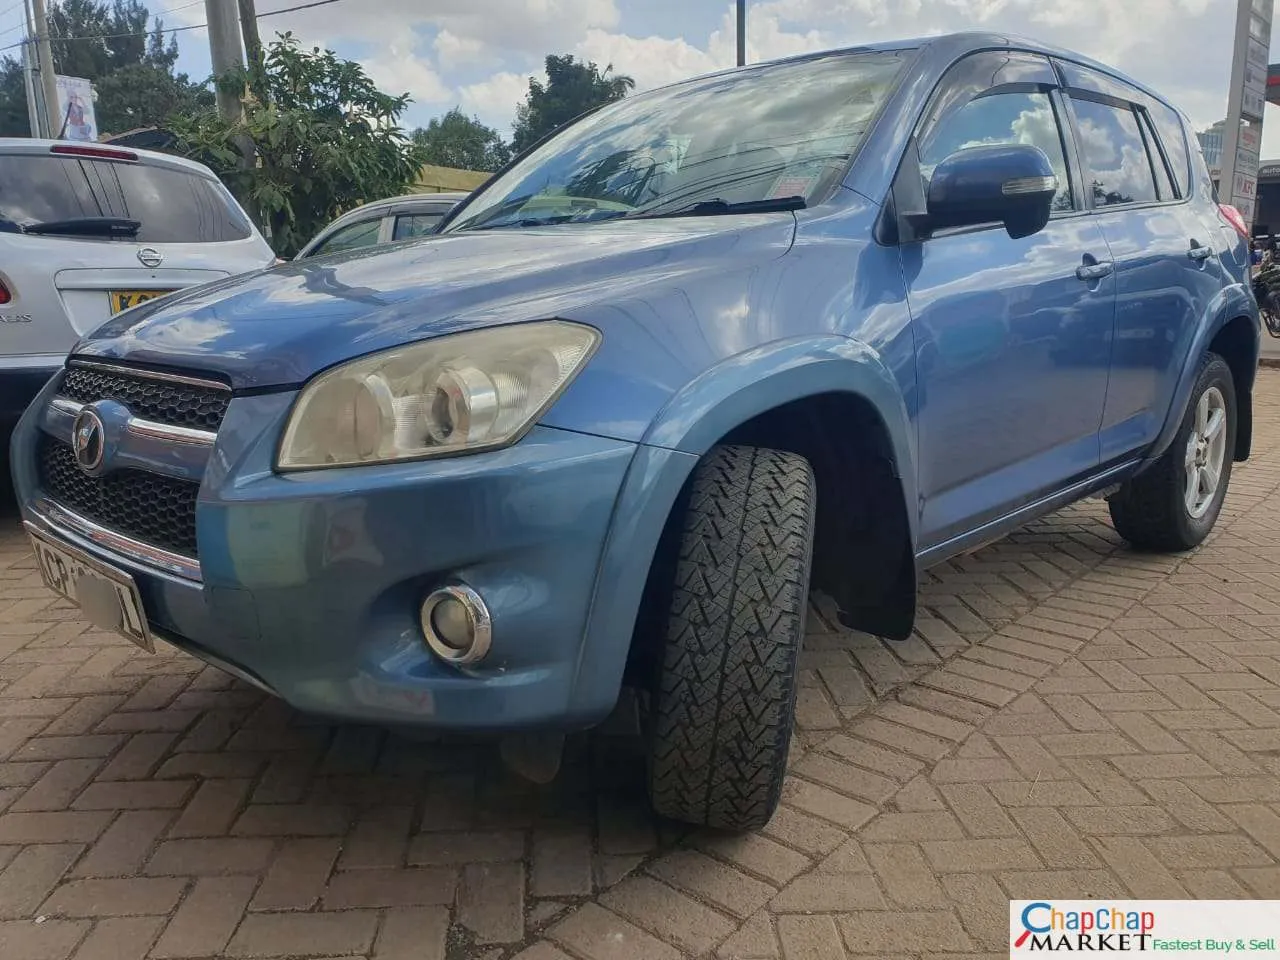 Cars Cars For Sale/Vehicles-Toyota RAV4 Asian Owner CHEAPEST You Pay 30% Deposit Trade in OK EXCLUSIVE 9